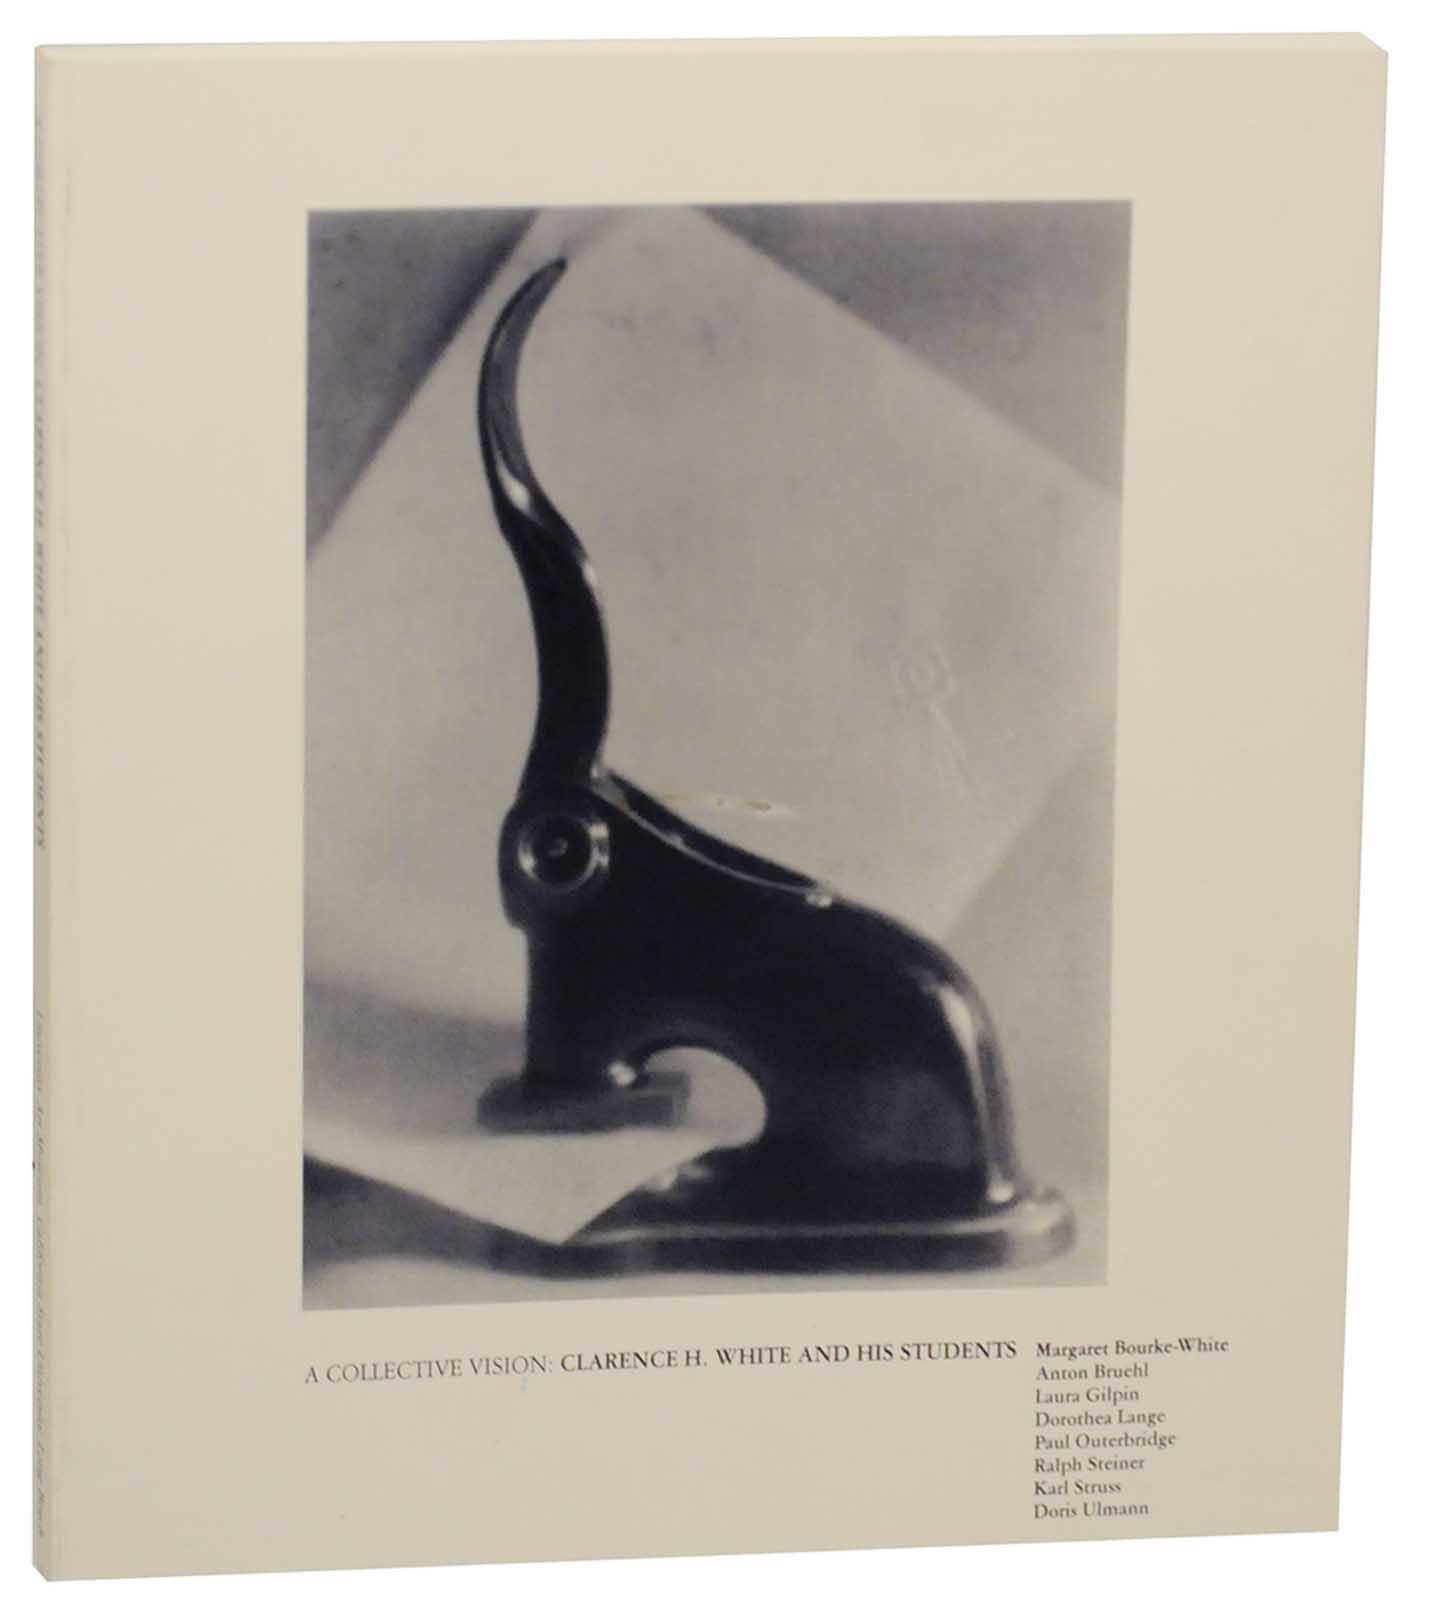 A Collective Vision: Clarence H. White and His Students - BARNES, Lucinda, Constance W. Glenn and Jane K. Bledsoe (editors) Margaret Bourke White, Anton Bruehl, Laura Gilpin, Dorothea Lange, Paul Outerbridge, Ralph Steiner, Karl Struss, and Doris Ulmann